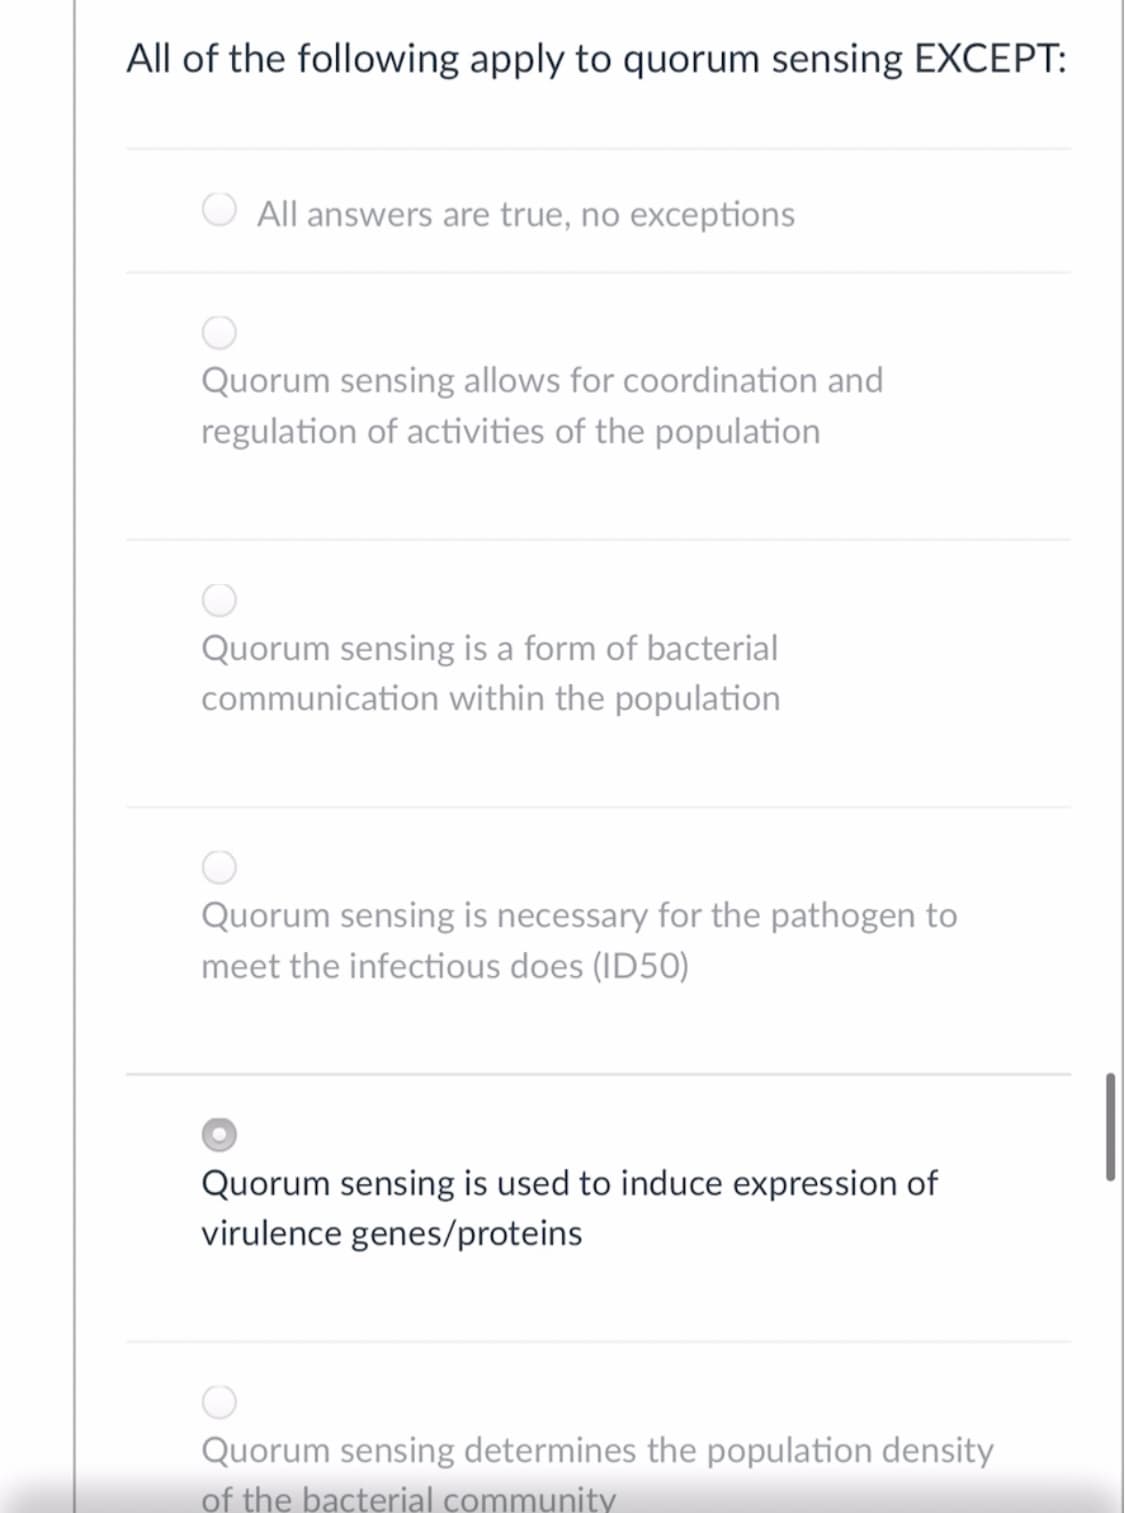 All of the following apply to quorum sensing EXCEPT:
All answers are true, no exceptions
Quorum sensing allows for coordination and
regulation of activities of the population
Quorum sensing is a form of bacterial
communication within the population
Quorum sensing is necessary for the pathogen to
meet the infectious does (ID50)
Quorum sensing is used to induce expression of
virulence genes/proteins
Quorum sensing determines the population density
of the bacterial community
